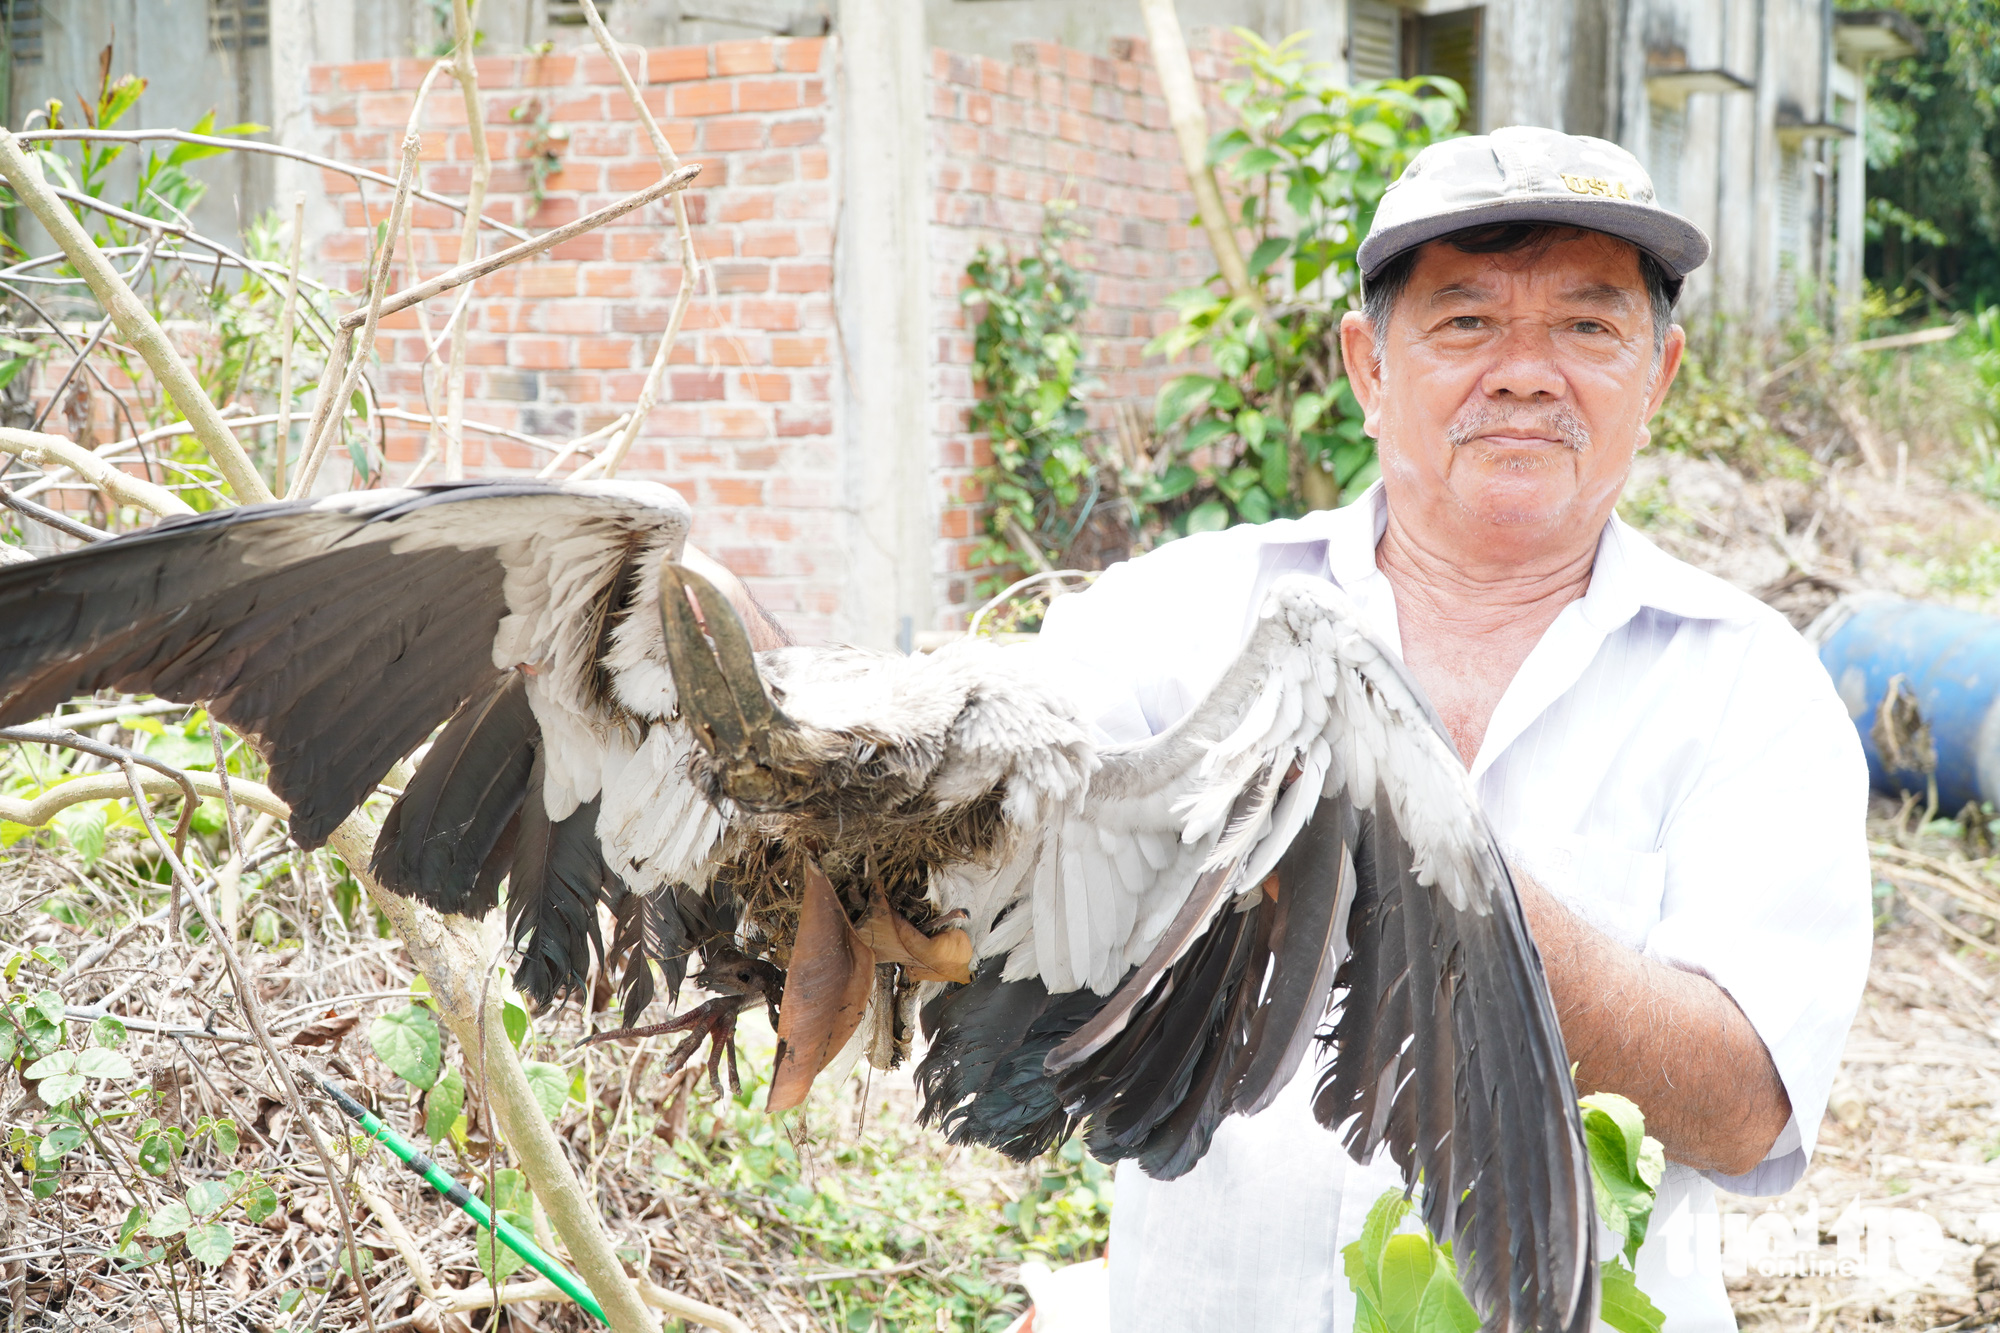 Farmer Le Van Chia holds a bird killed by poachers in his garden in Vinh Long Province, Vietnam. Photo: Chi Hanh / Tuoi Tre